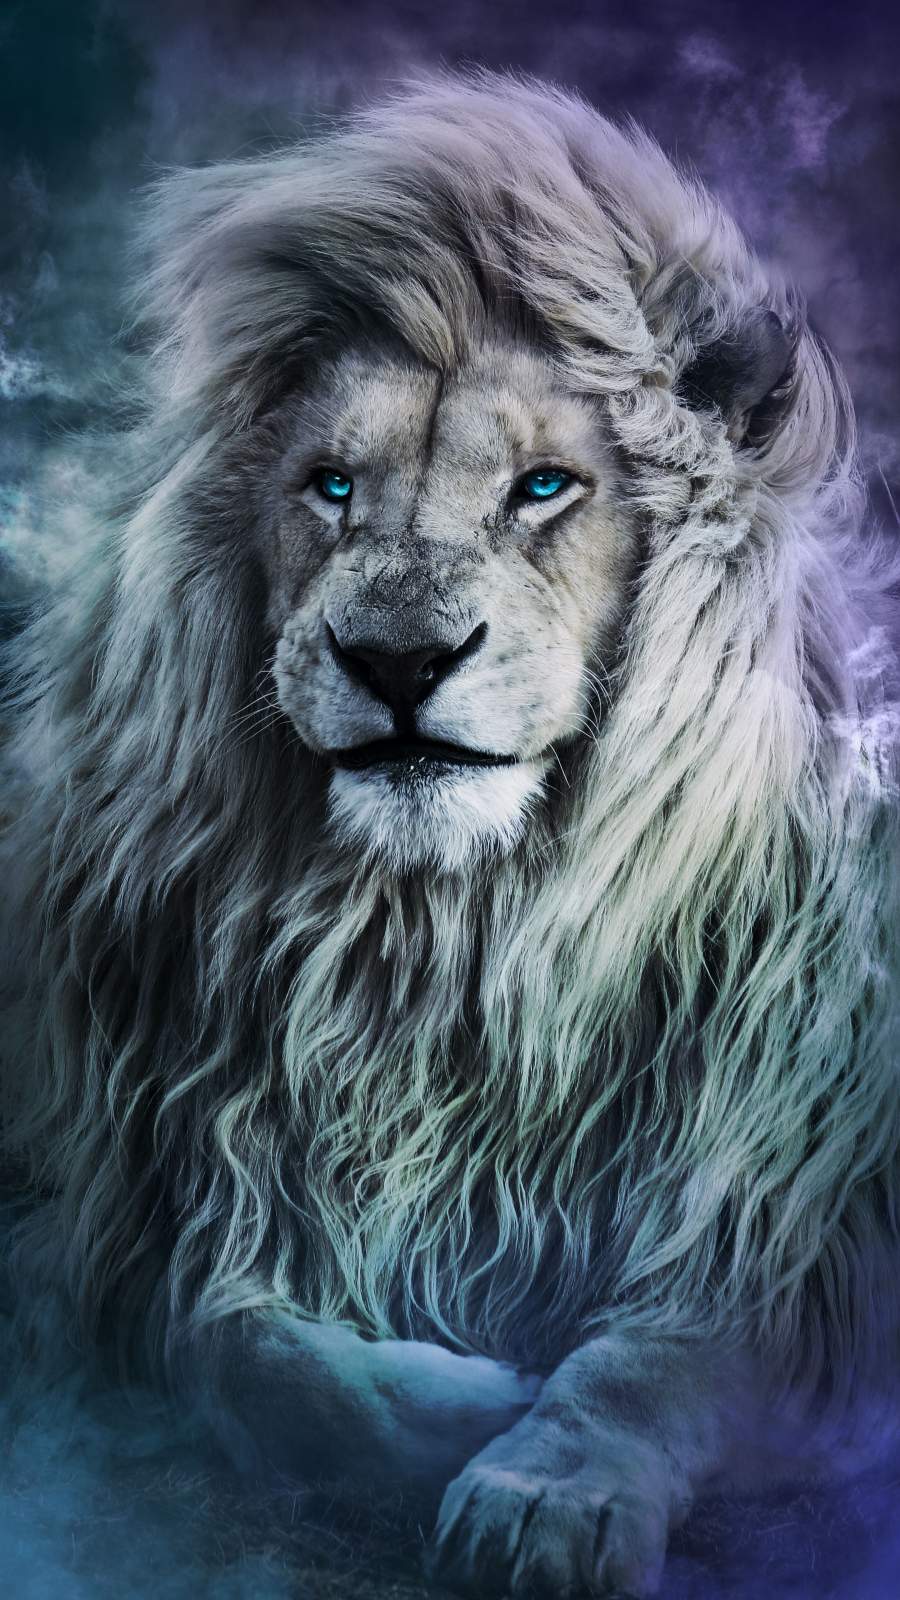 Top 999+ 3d Lion Wallpaper Full HD, 4K✓Free to Use